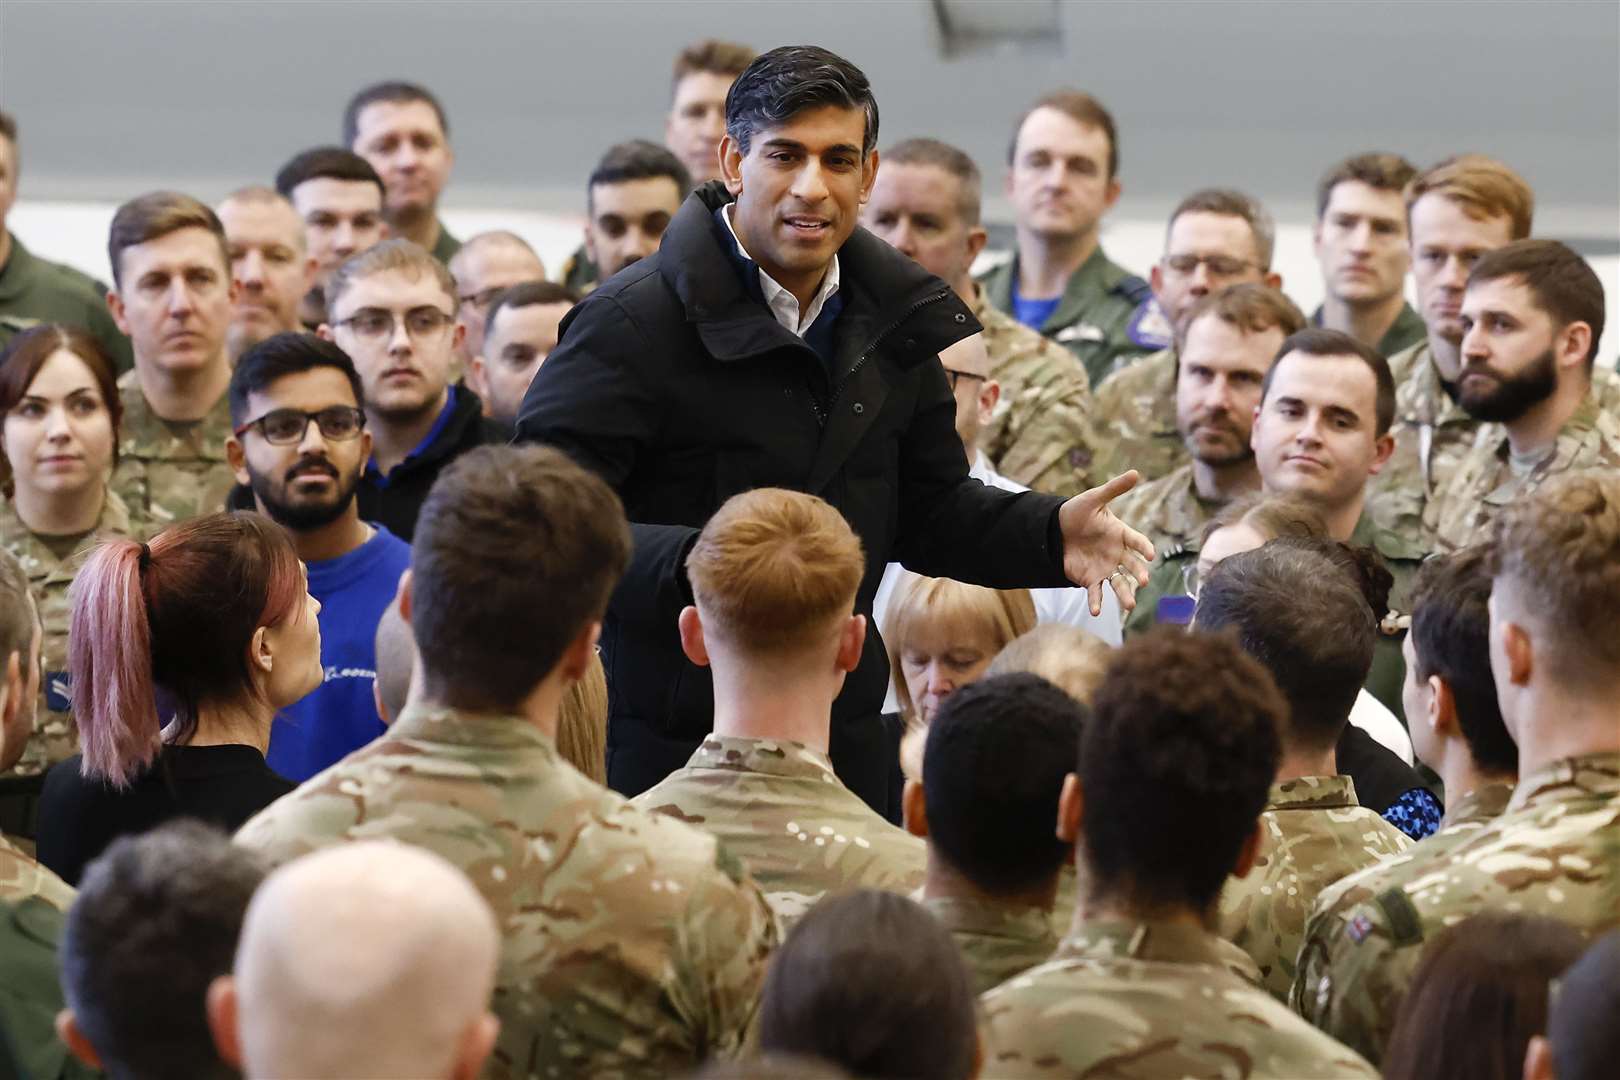 The Prime Minister met members of the armed forces (Jeff J Mitchell/PA)